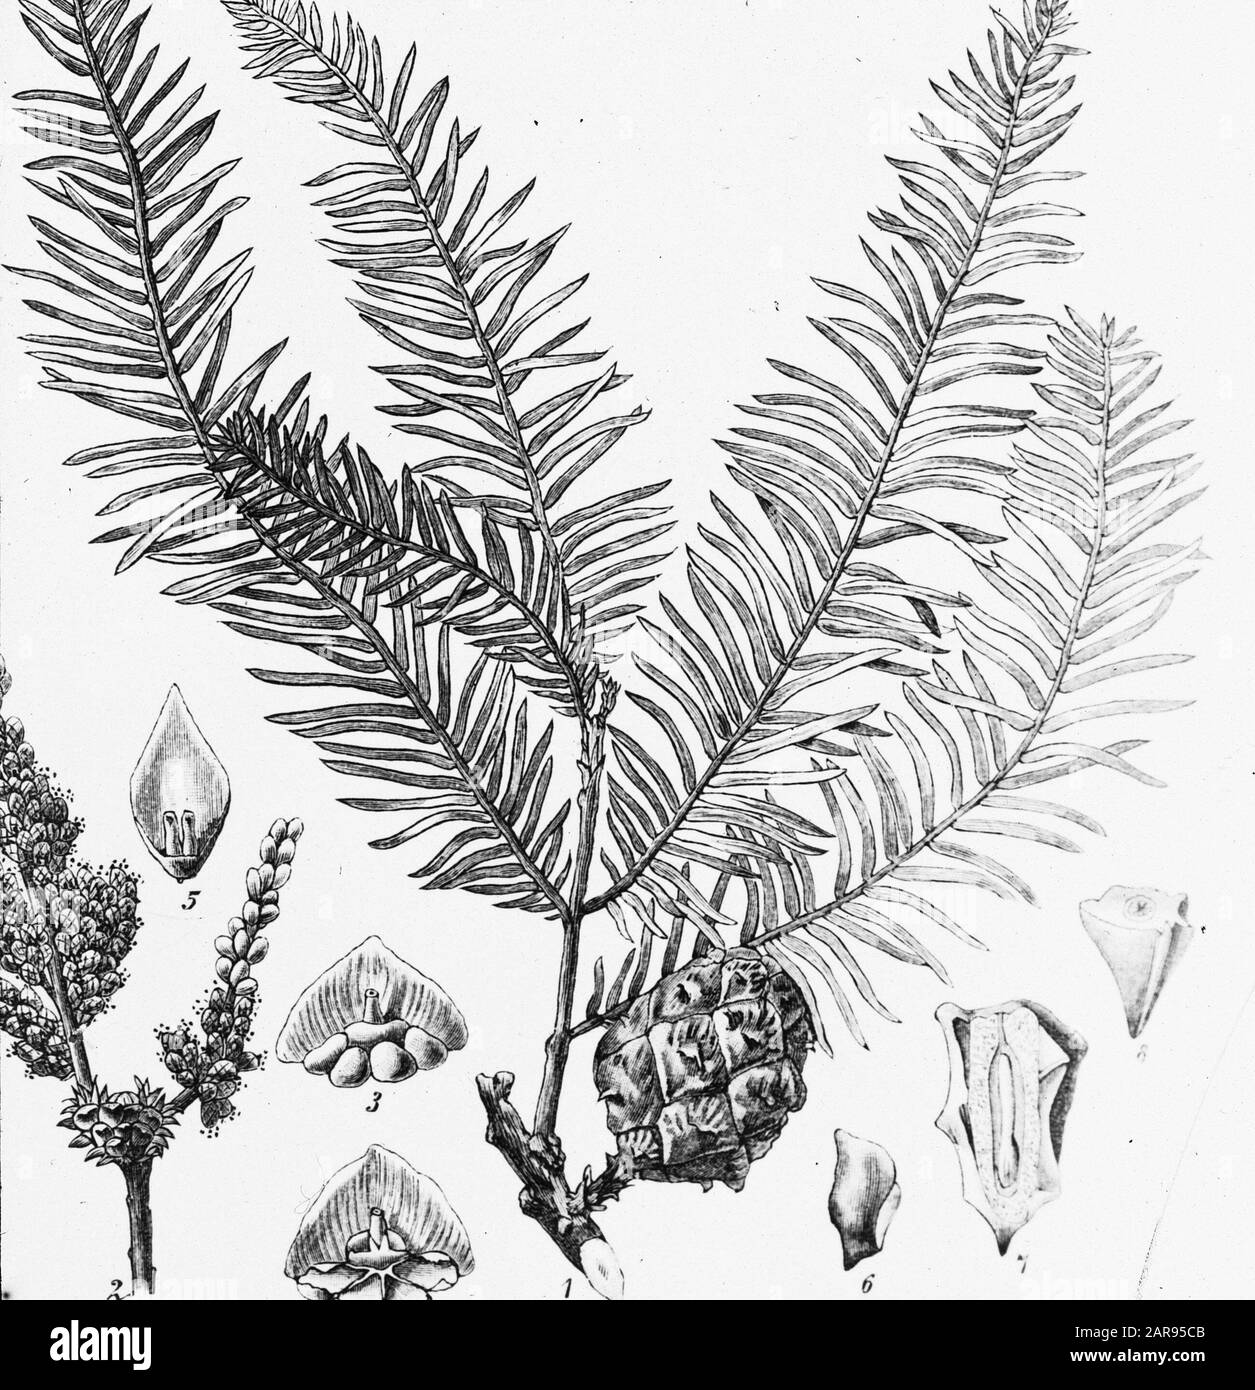 drawing Date: undated Keywords: trees, forests, botanical, avenues, coniferous wood Personal name: taxodium distichum Stock Photo